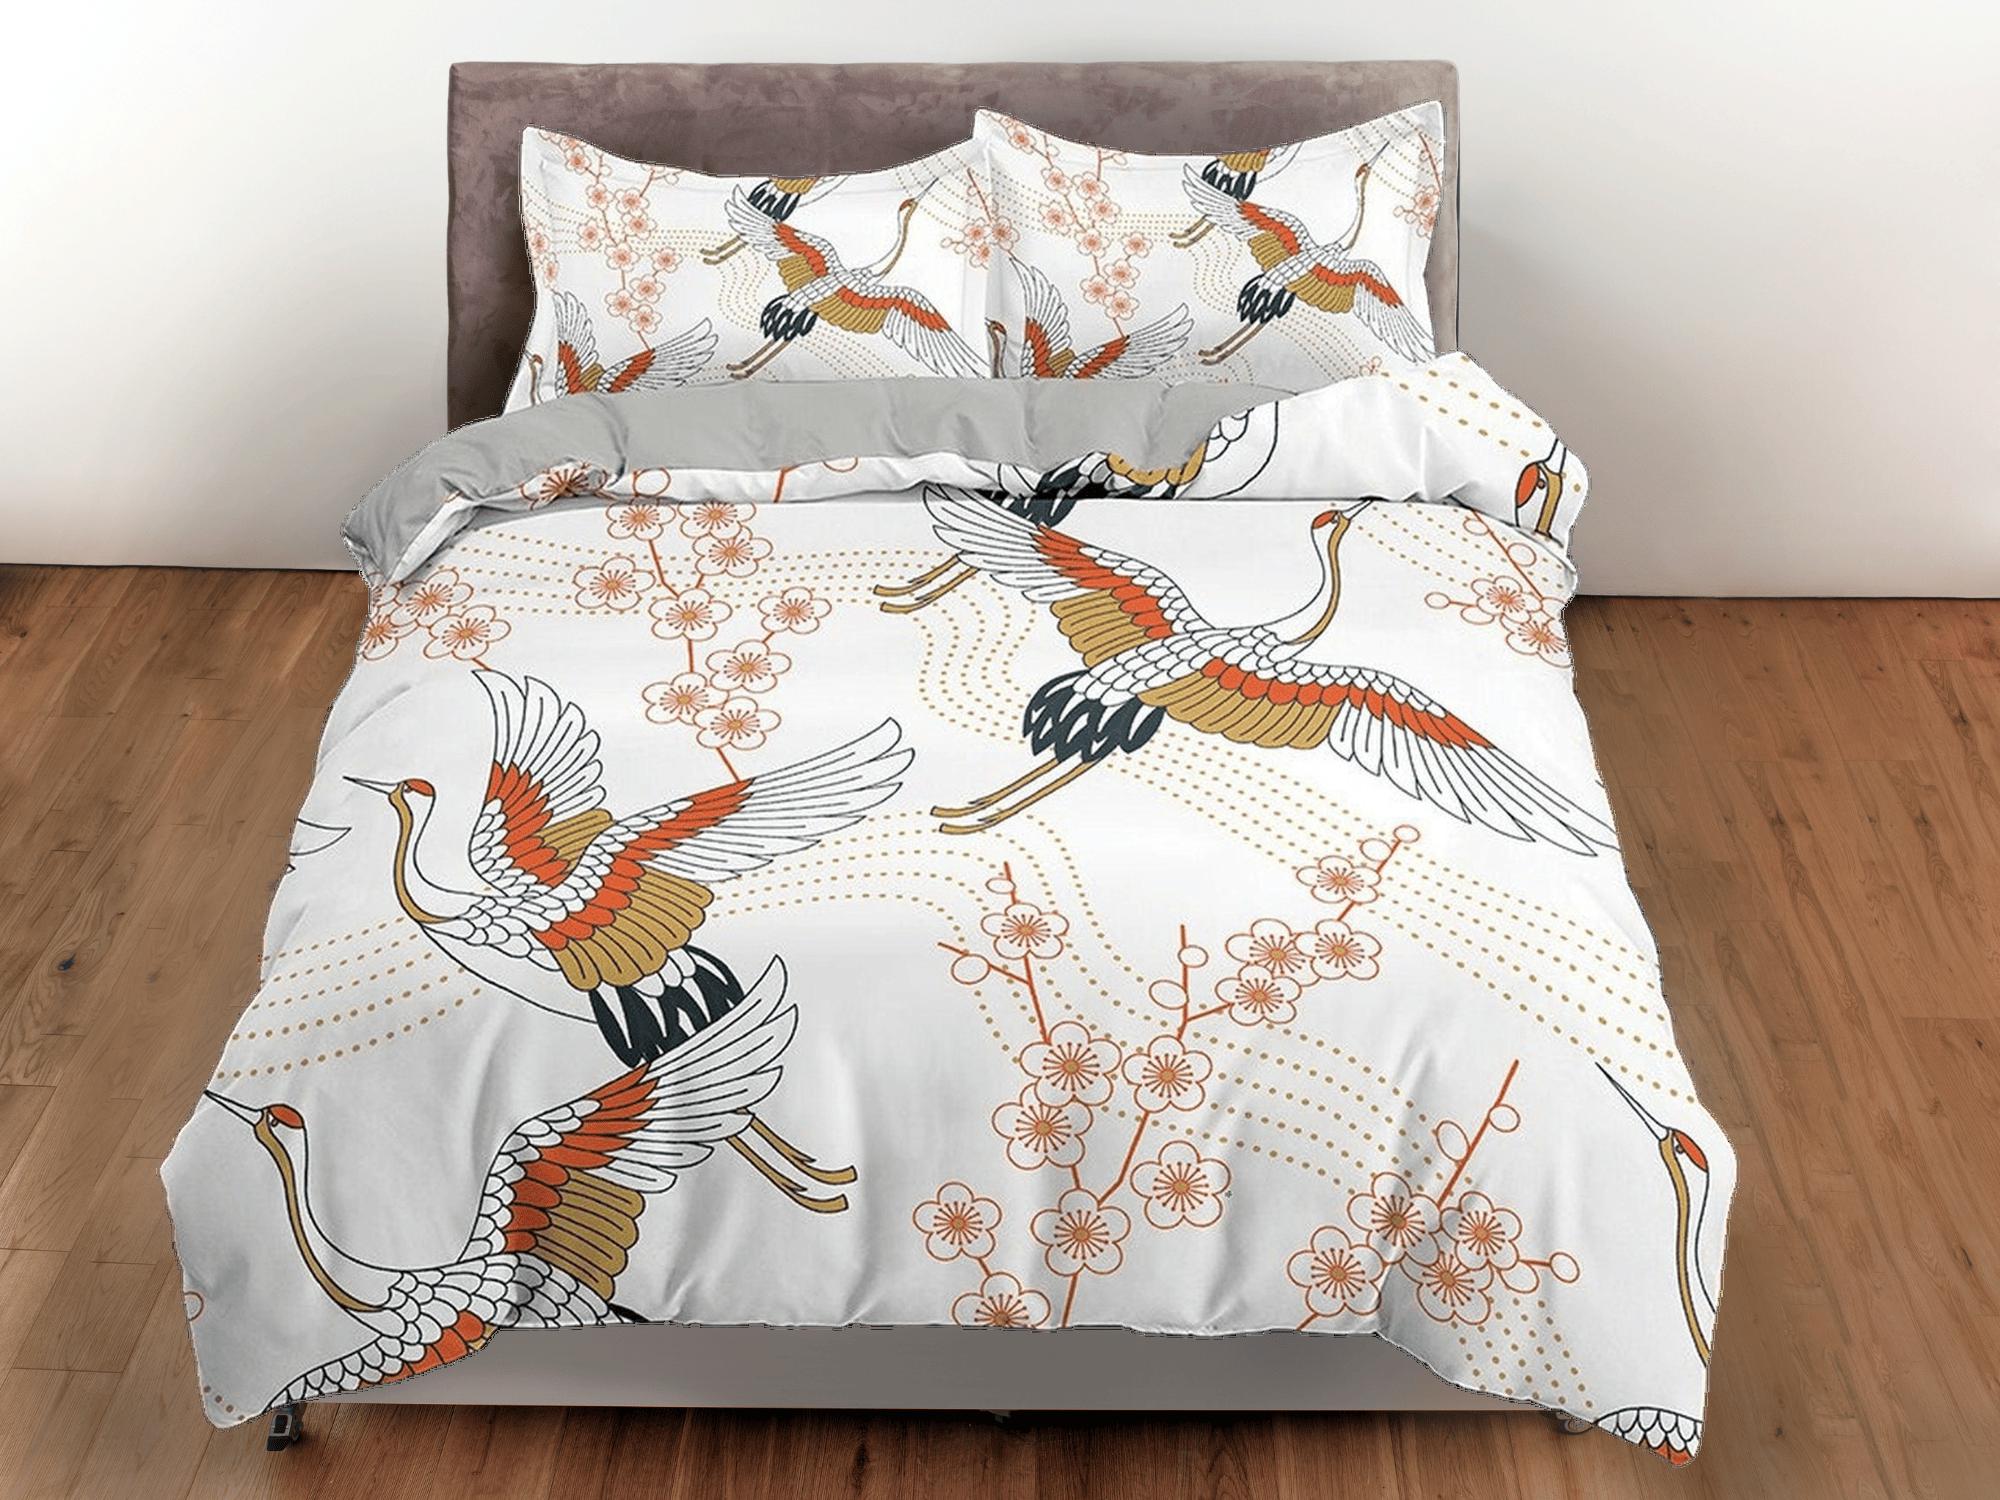 daintyduvet White oriental bedding with floral prints crane bird design, Asian duvet cover set with cherry blossom, Japanese bedding, King, Queen, Full